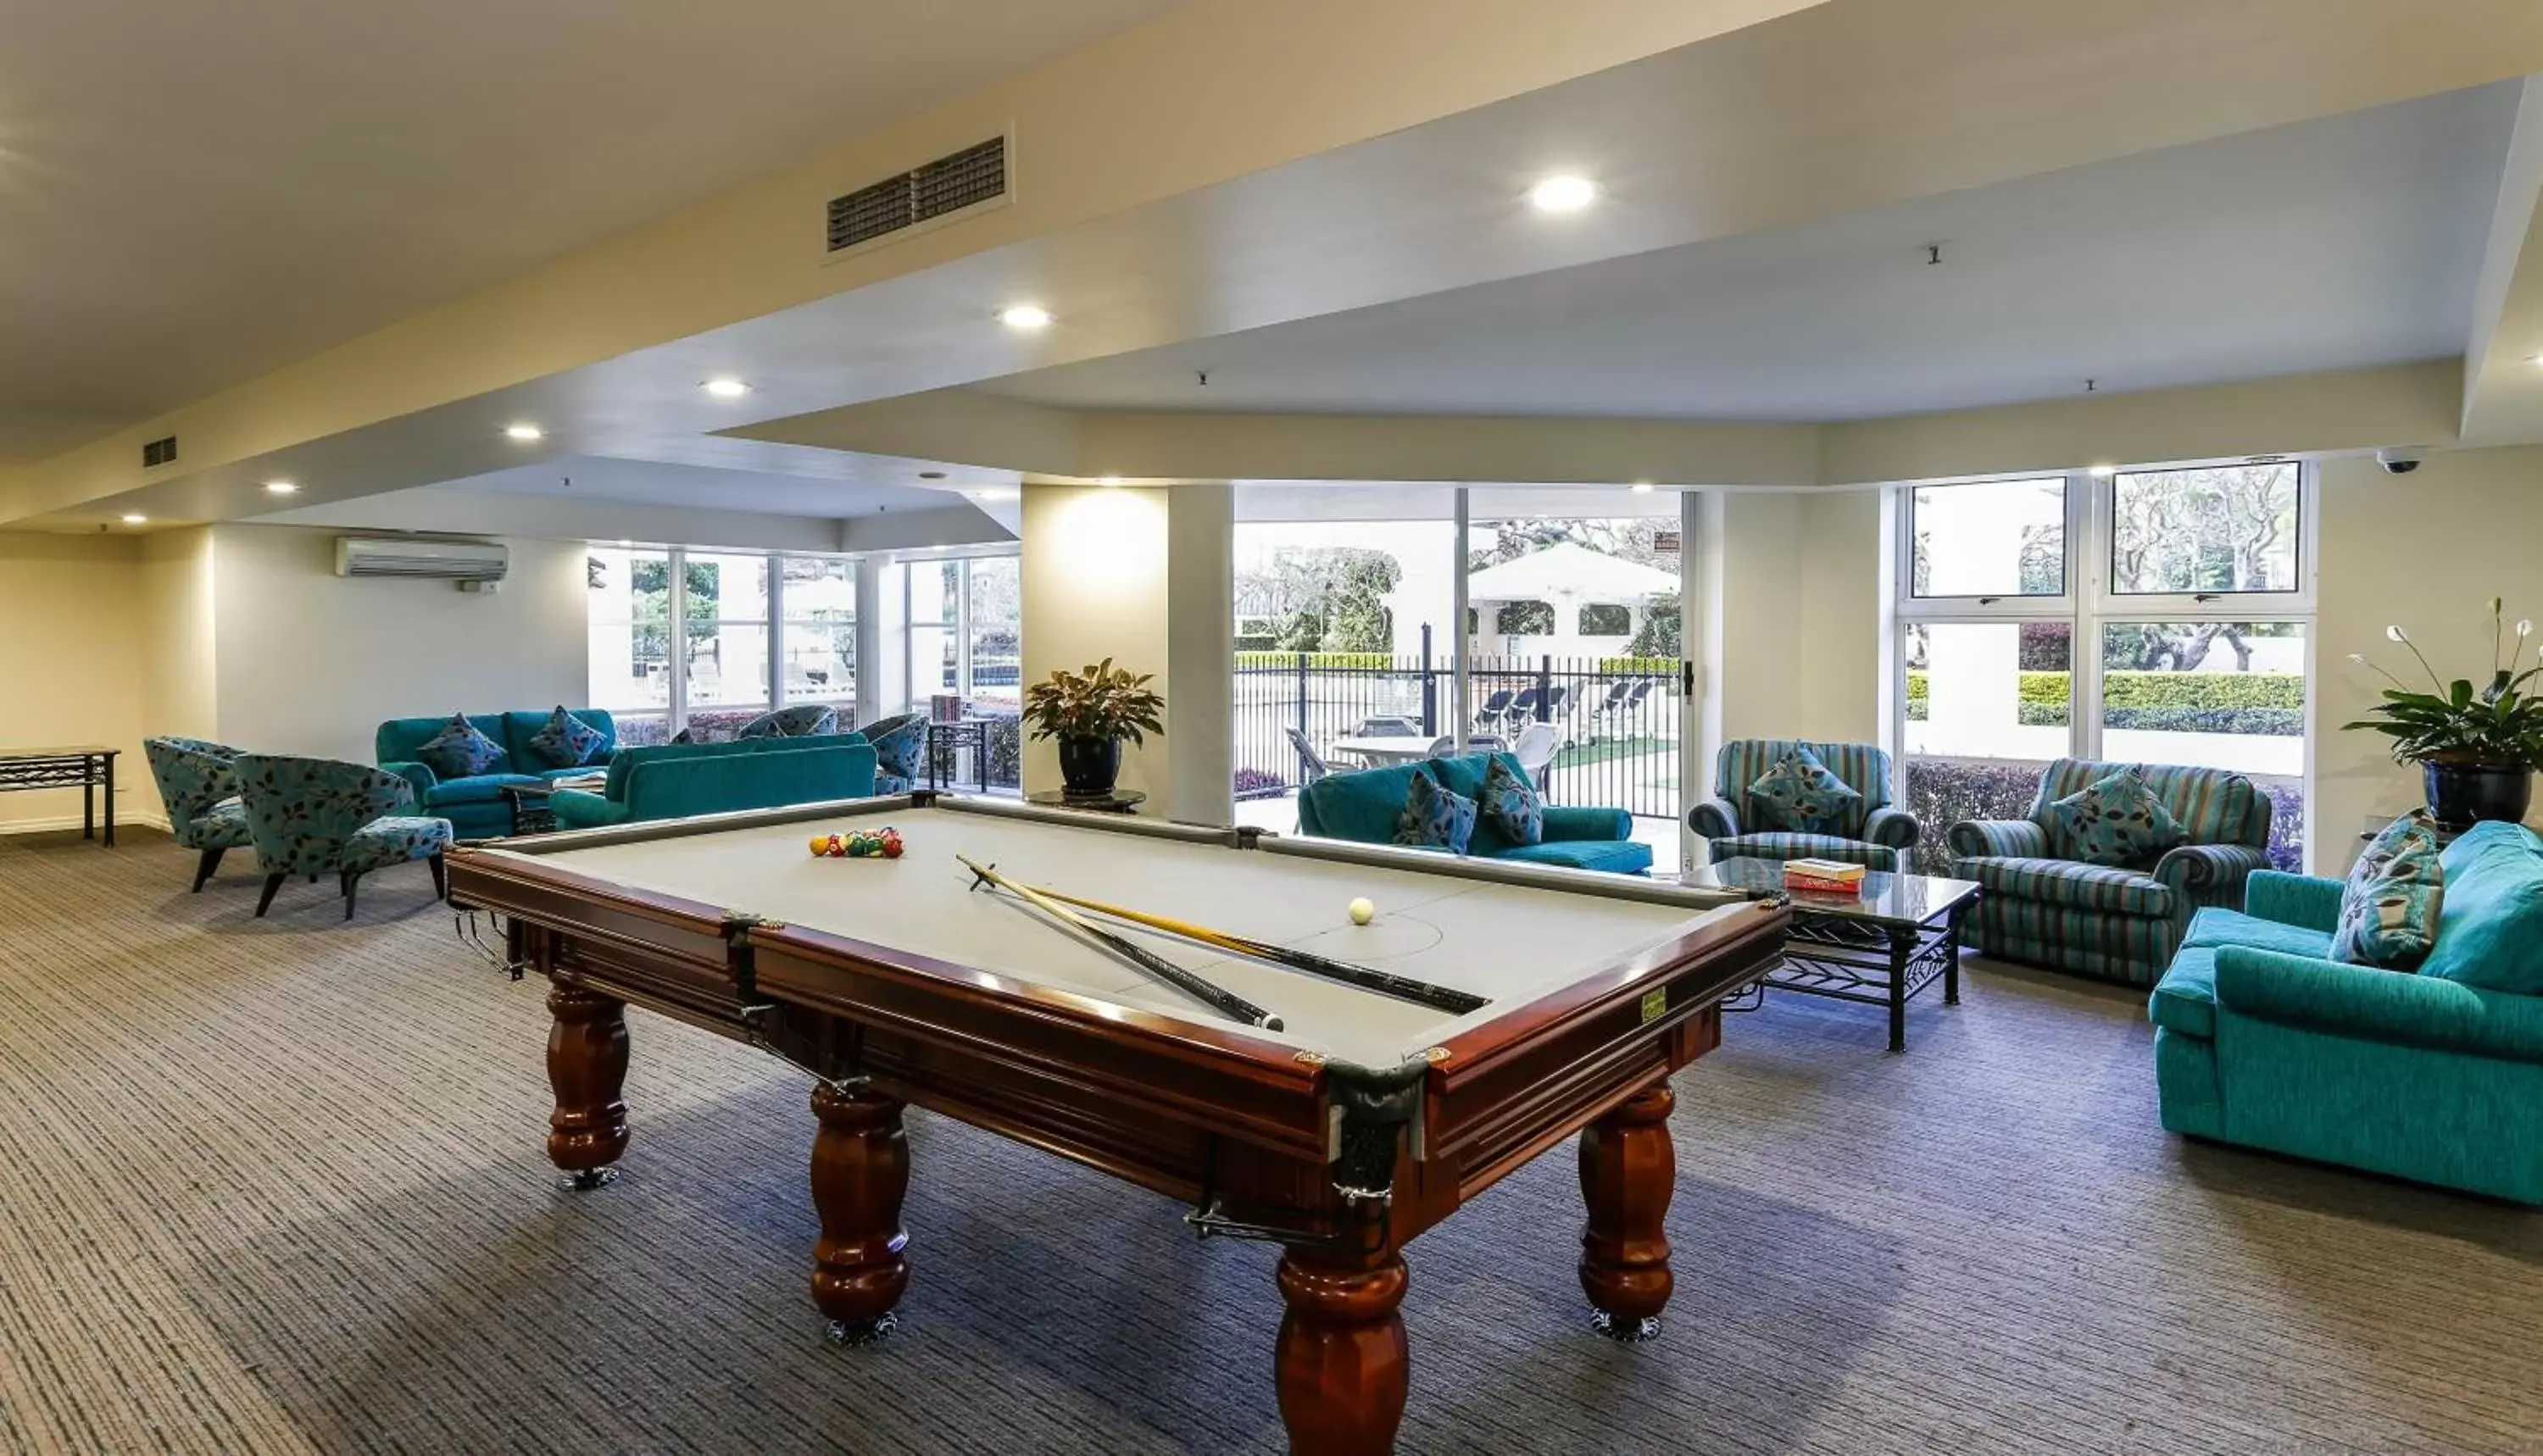 Billiards in Belle Maison Apartments - Official